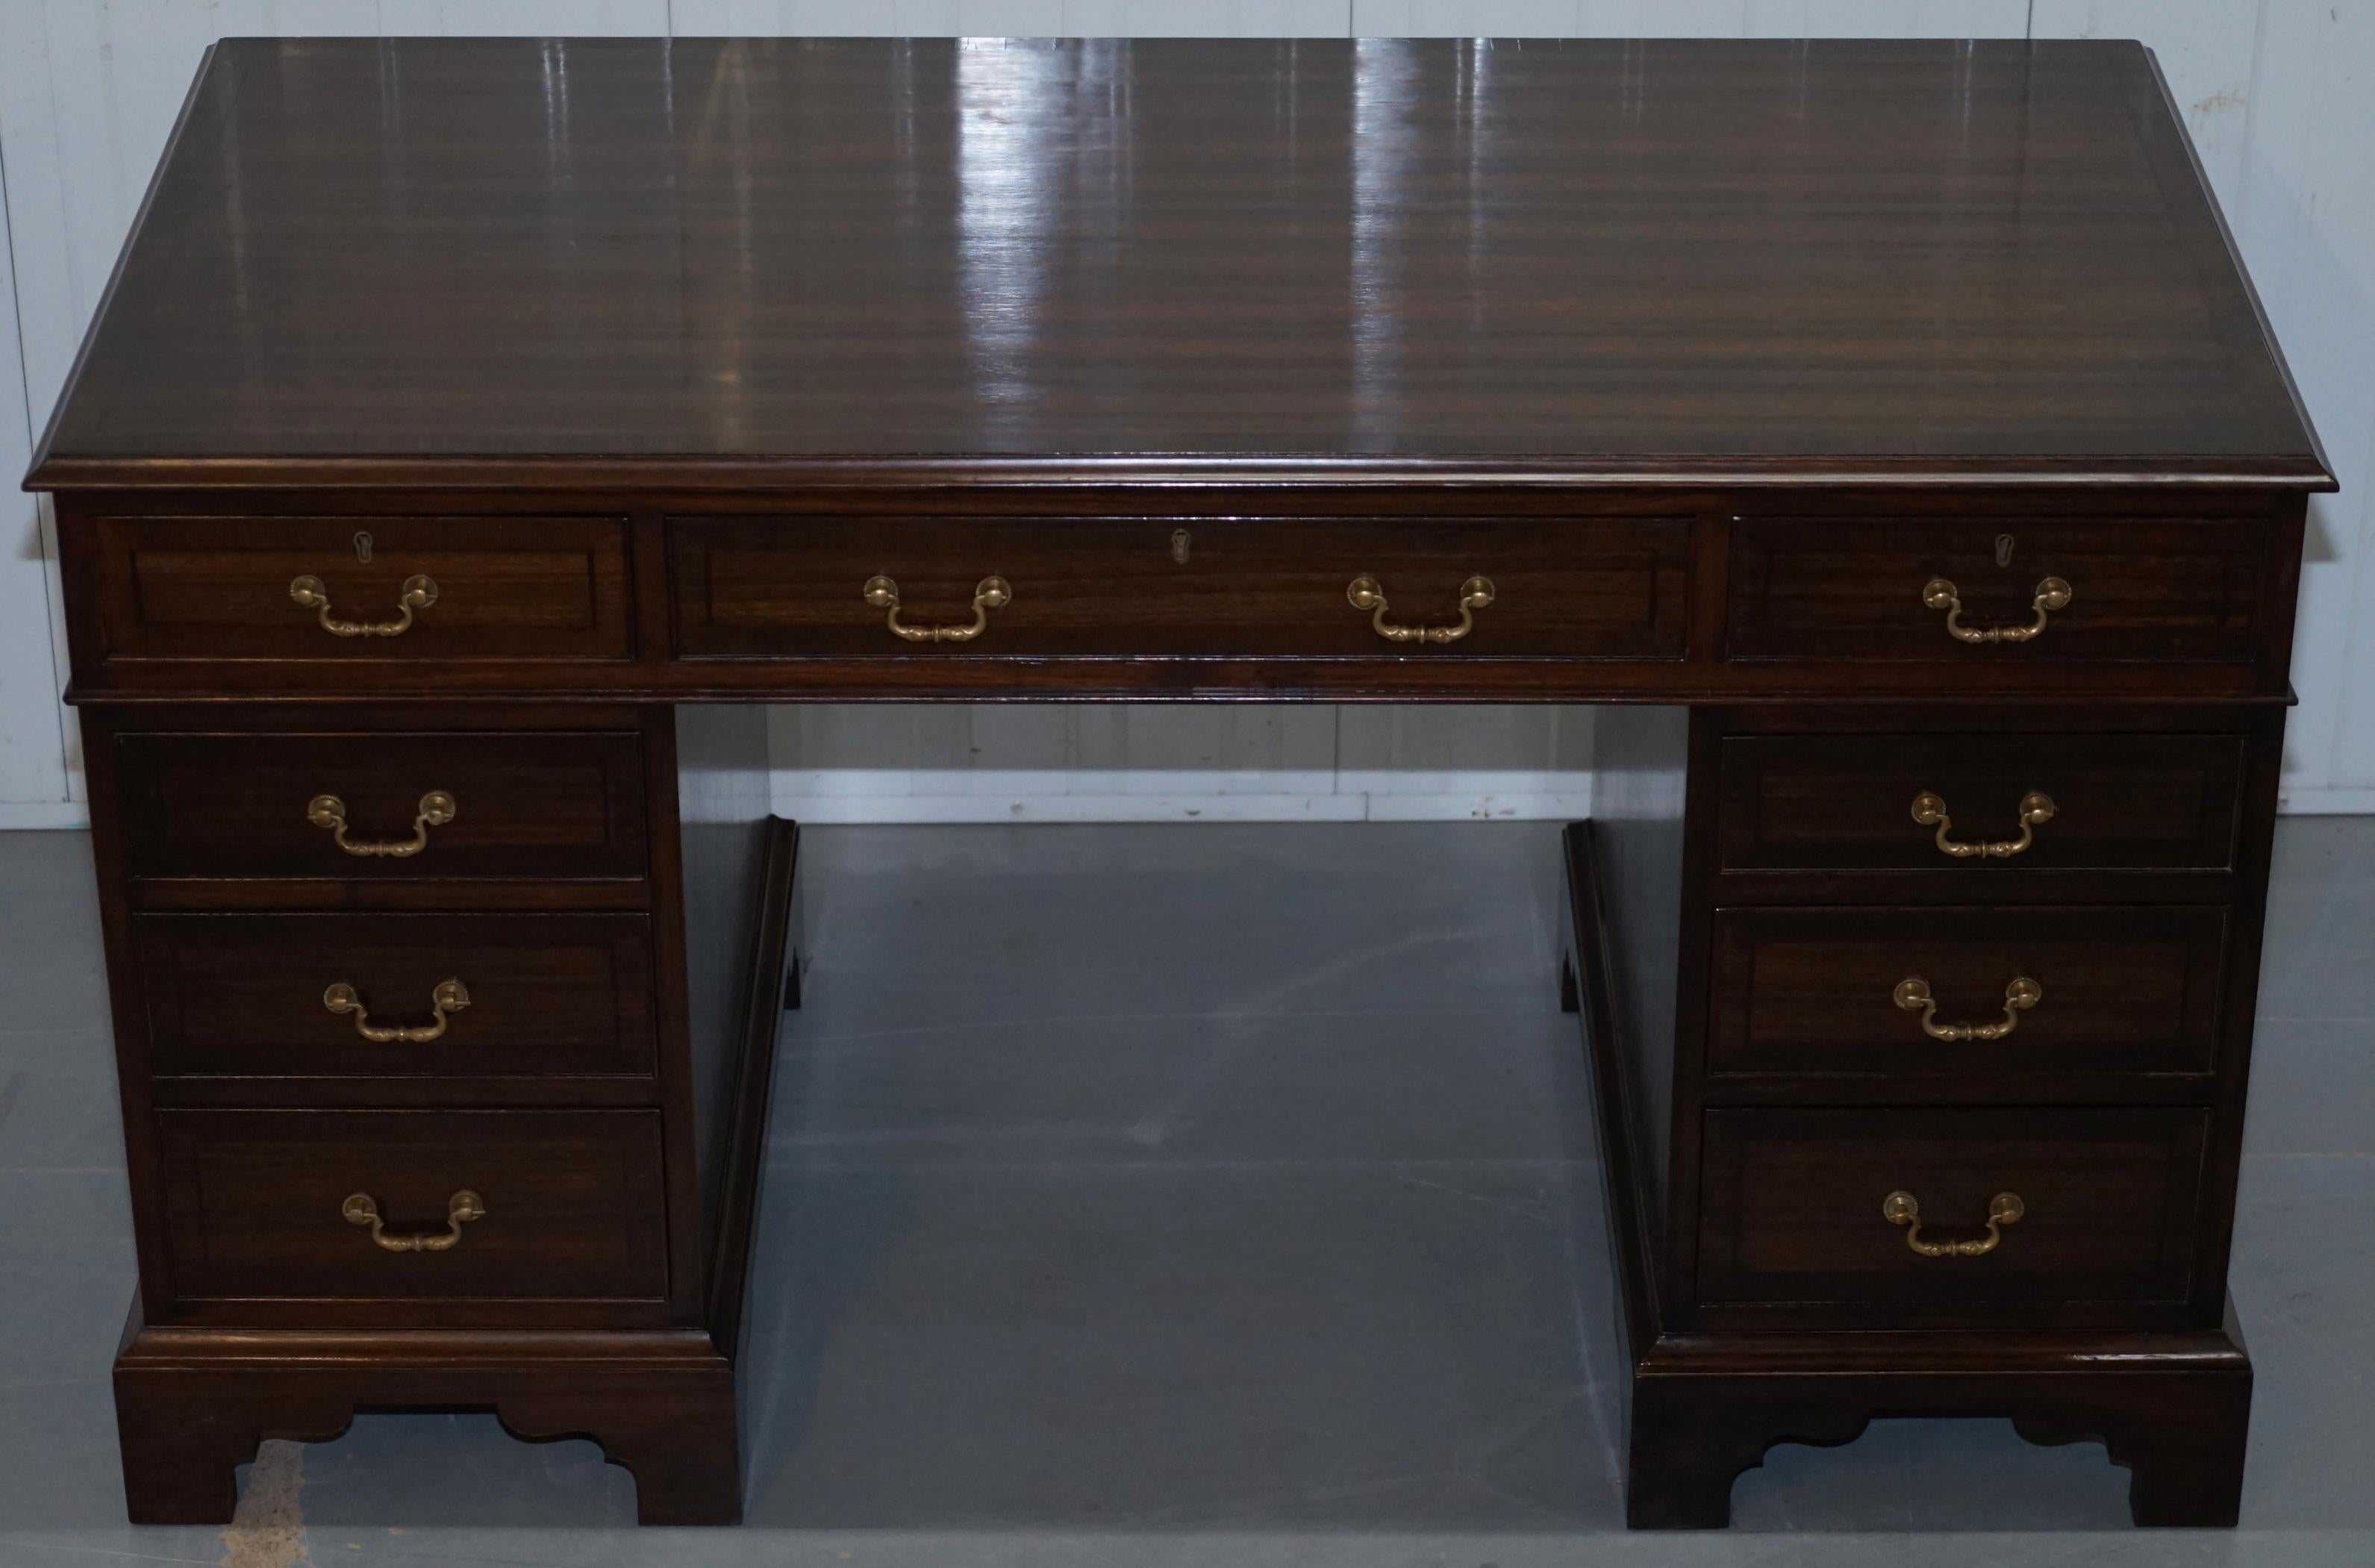 We are delighted to offer for sale this stunning vintage hand made solid mahogany twin pedestal partner desk 

A beautiful, desirable and unique piece, this desk has a custom solid wood top which has a wonderful patina

The desk comes in three